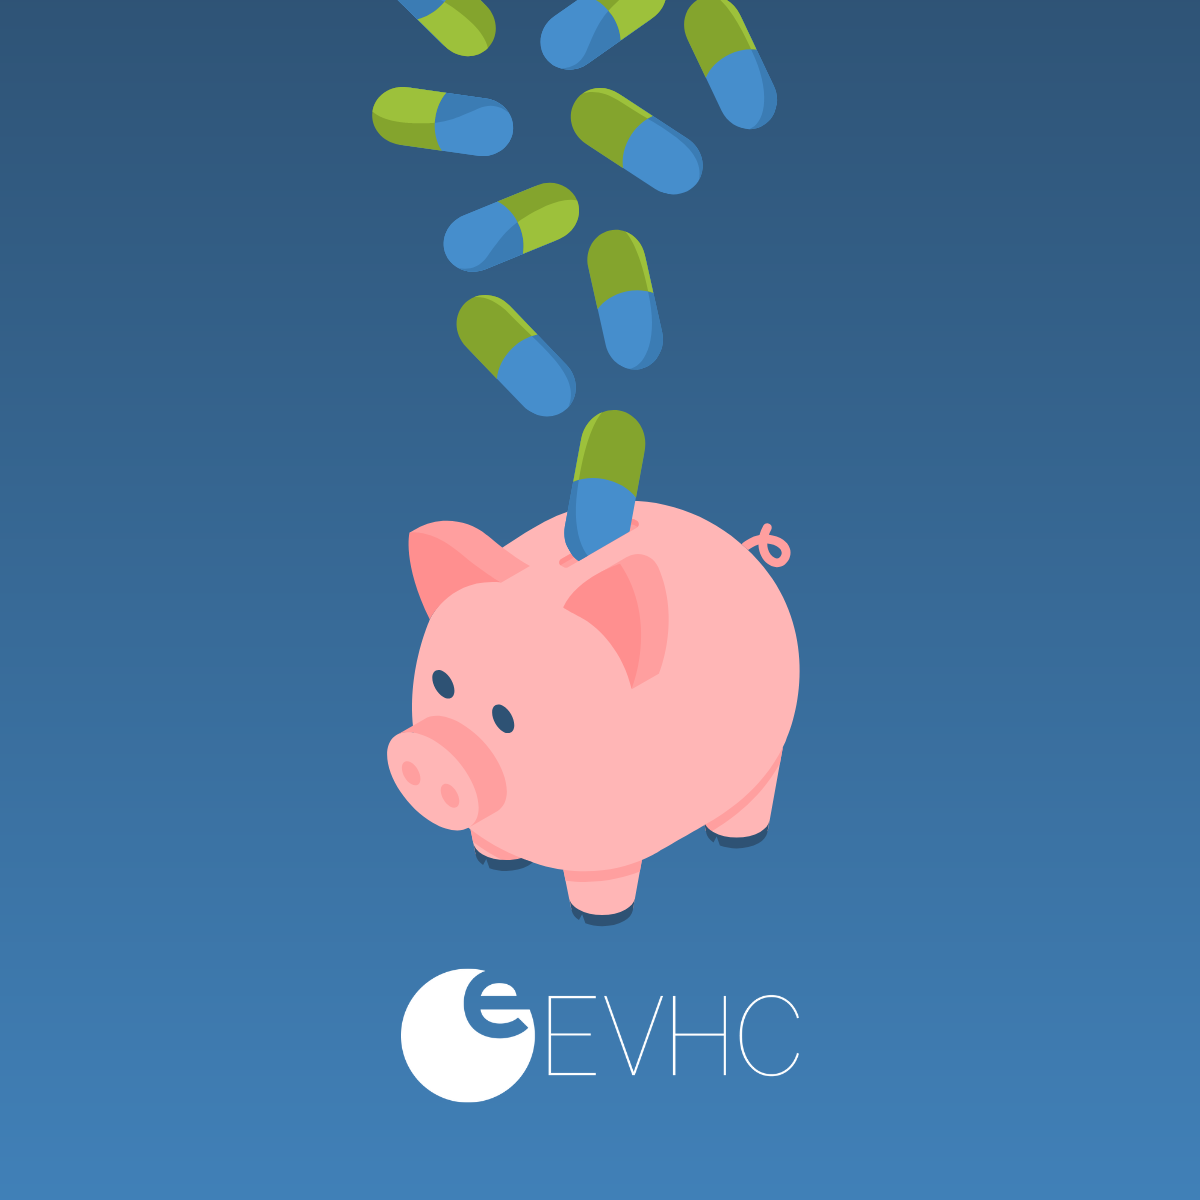 EVHC Helps Company Save $22,000 a Month by Not Auto-Adjudicating